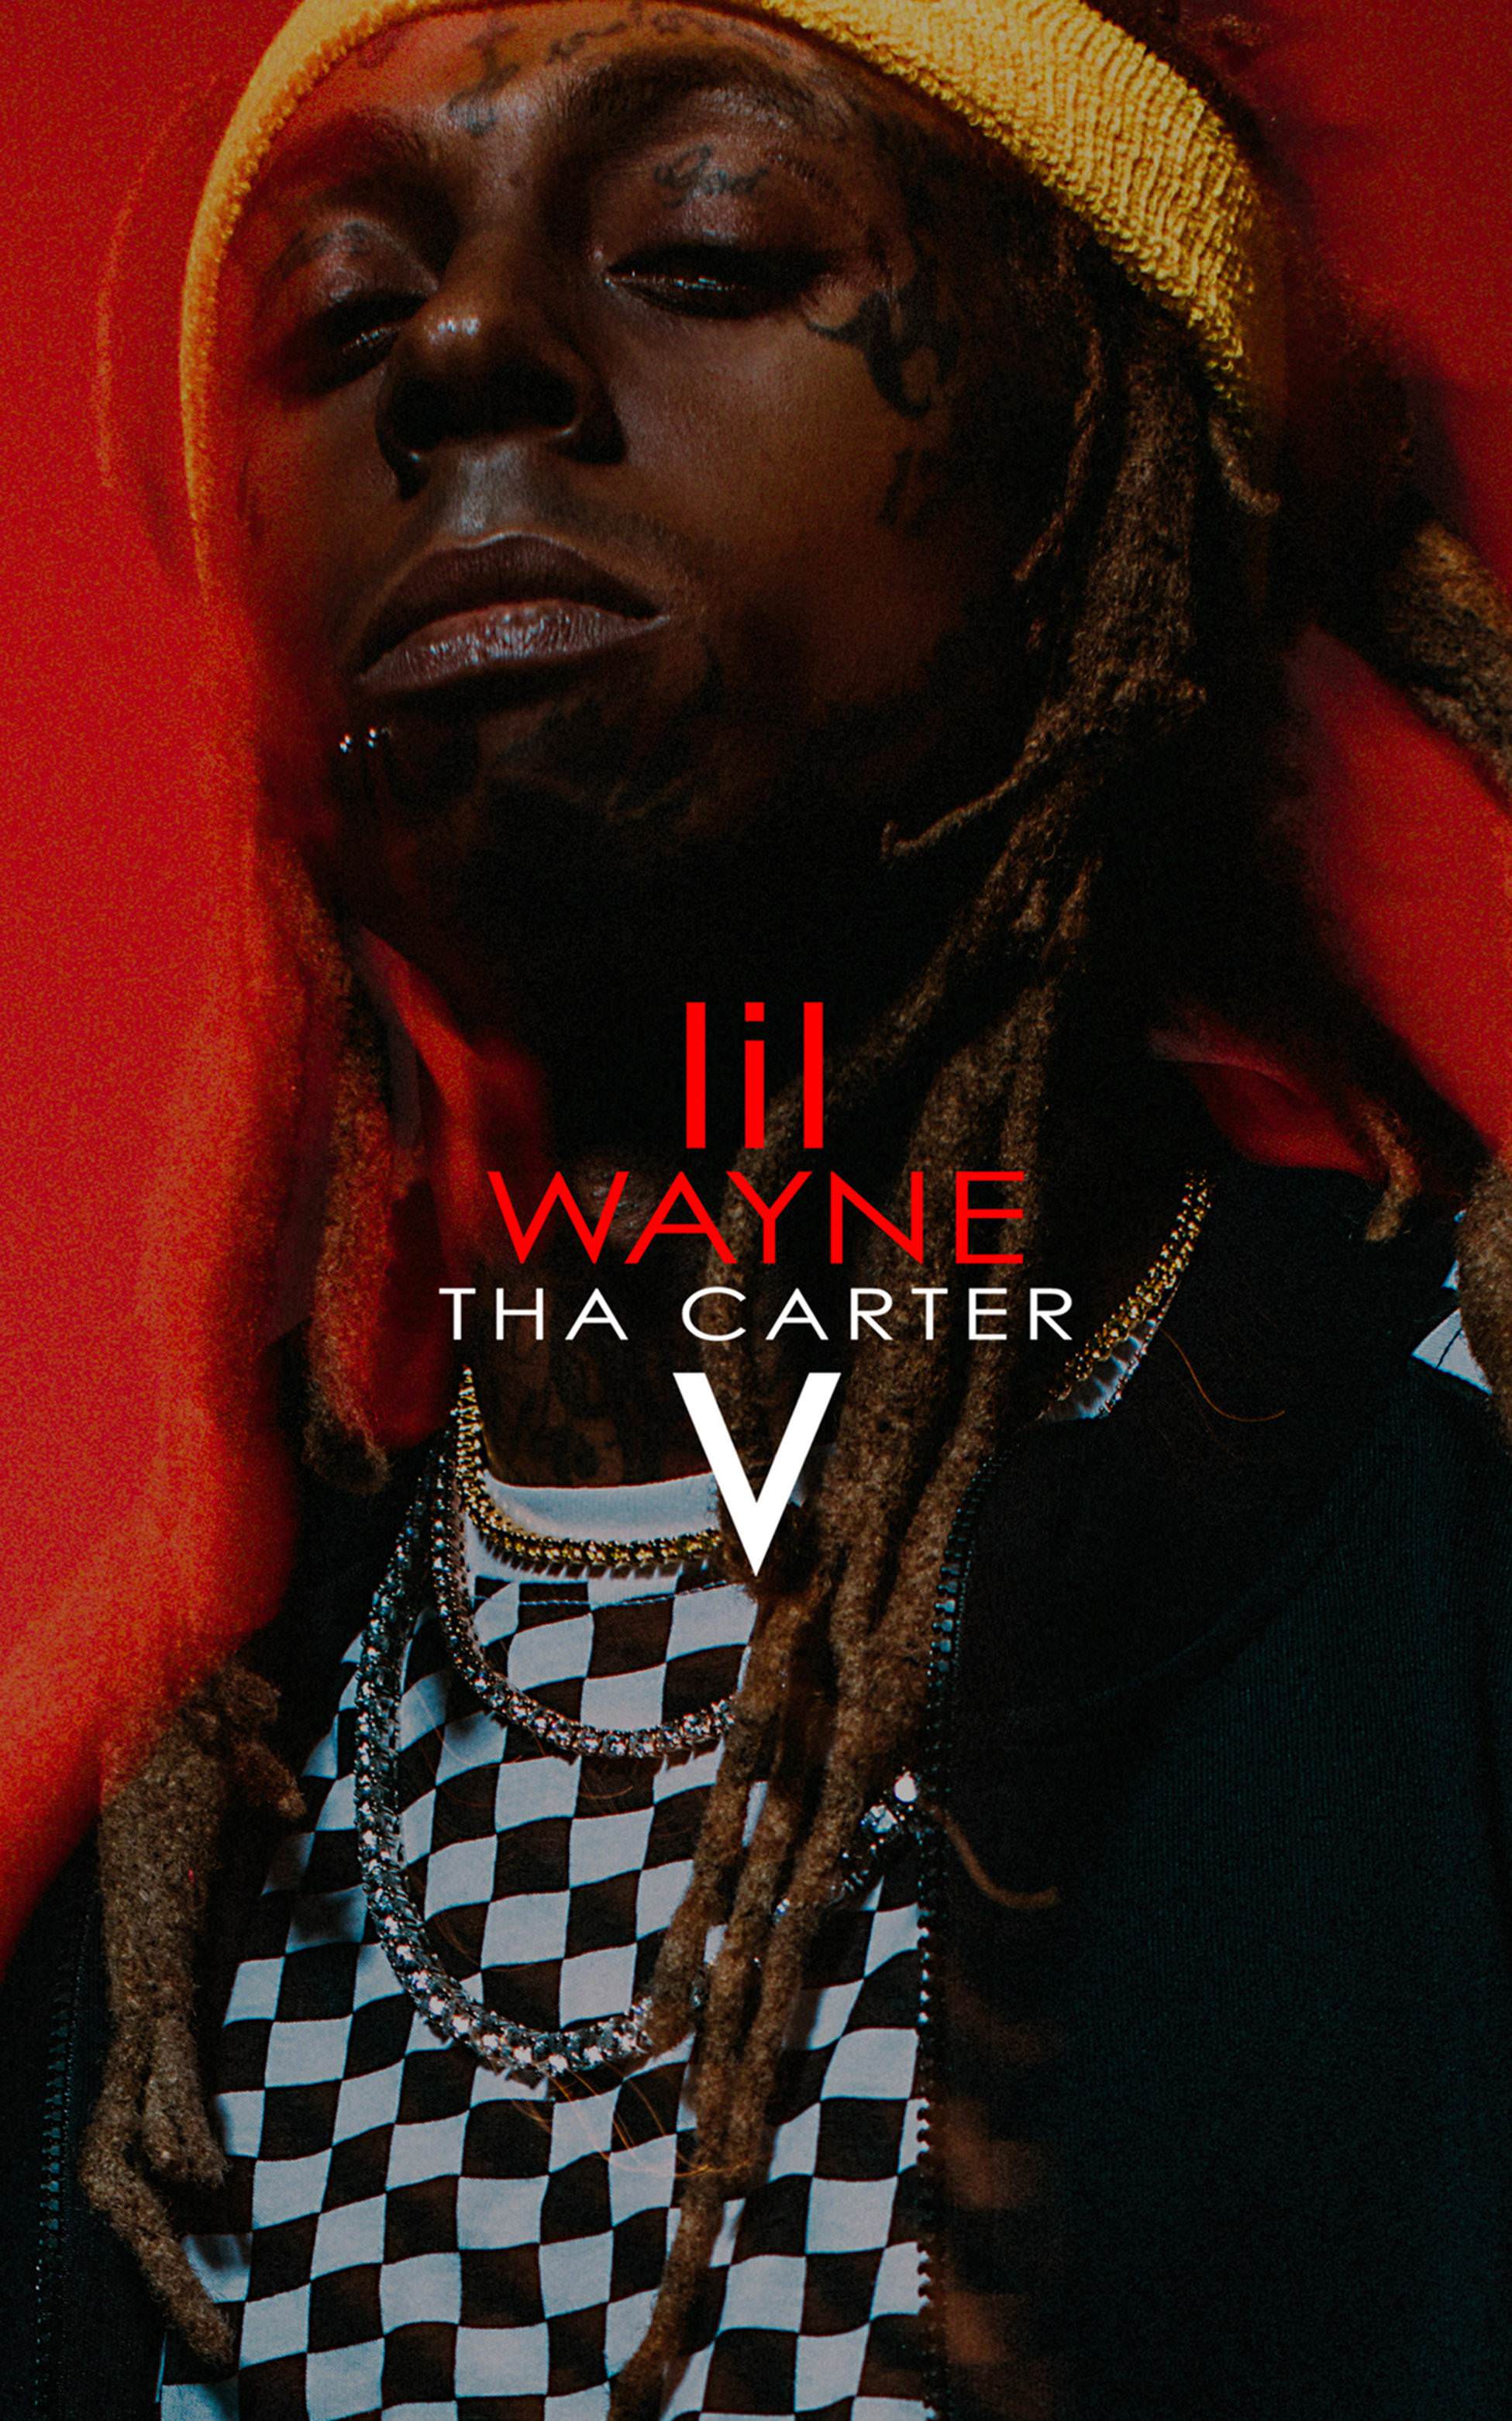 Here are some mobile wallpaper for C5 from Lil Wayne & the Zedge app